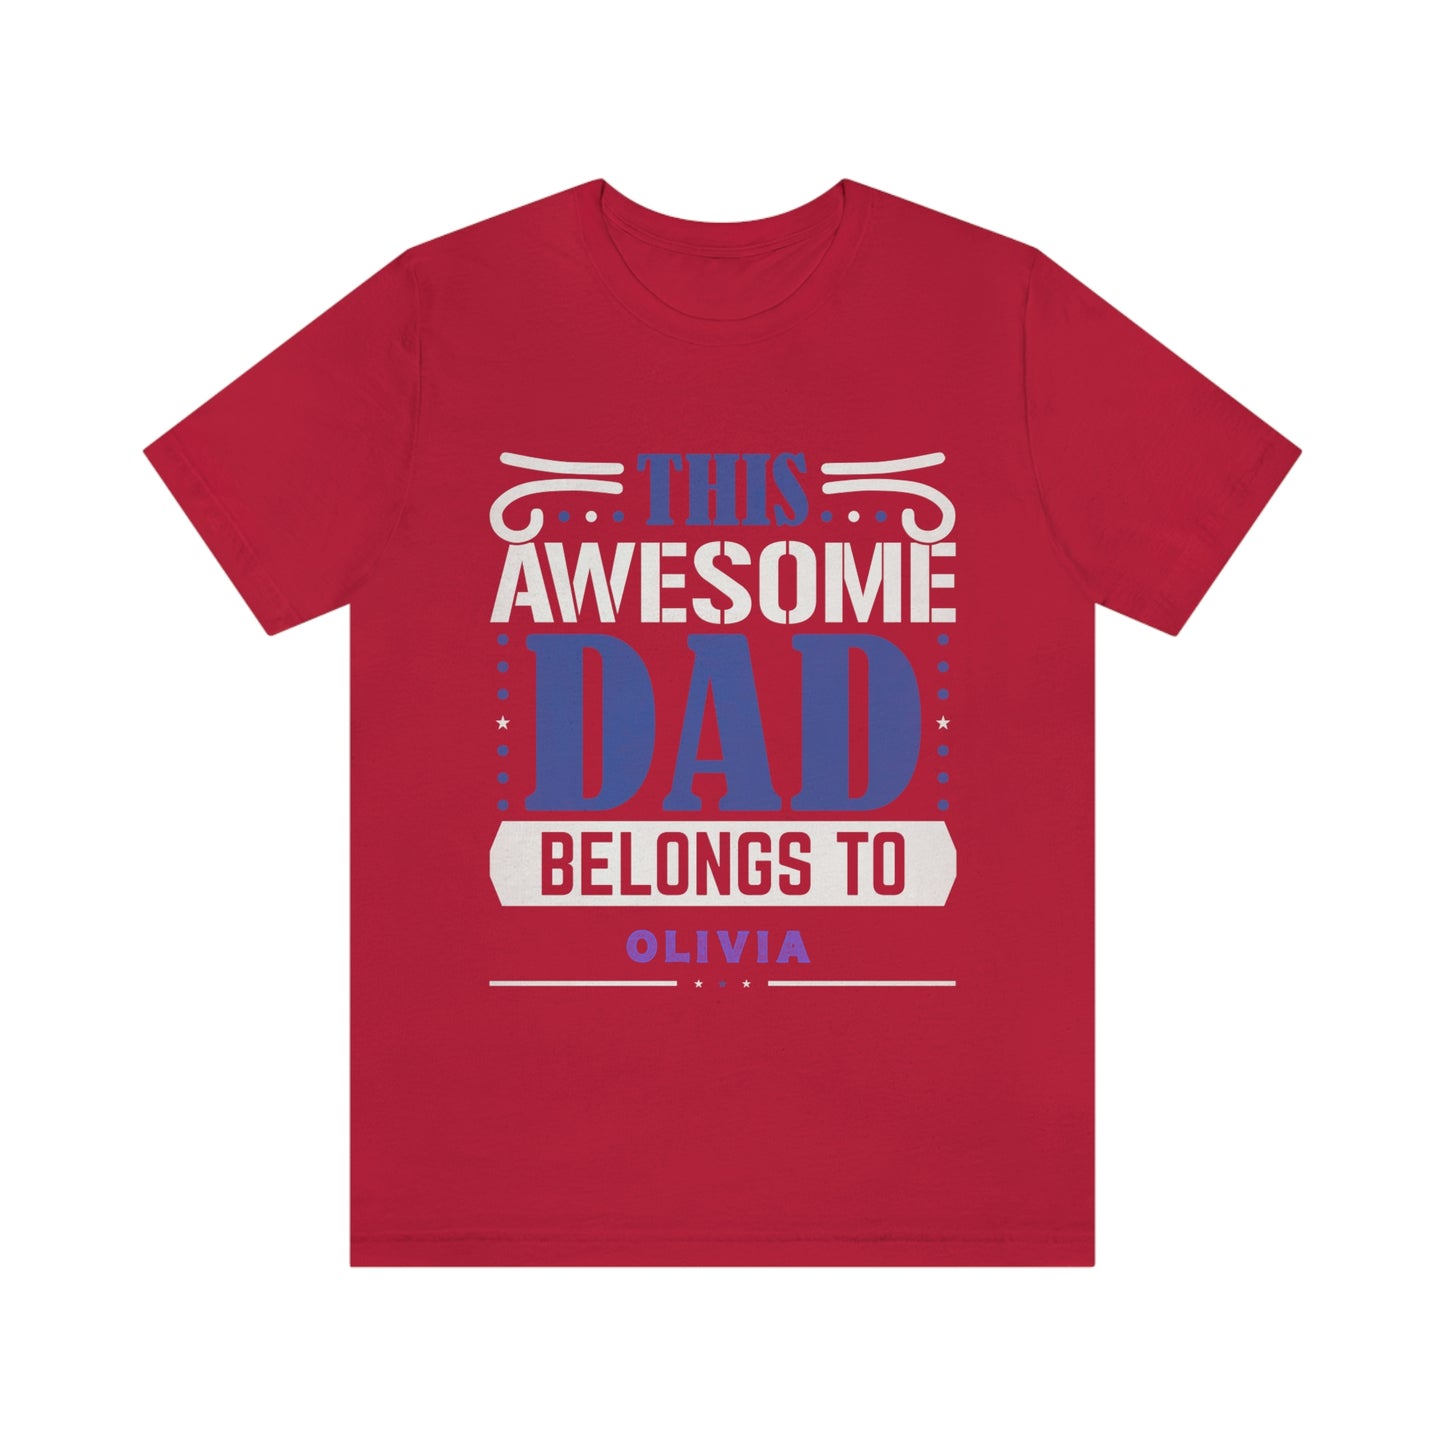 This Awesome Dad Belongs To Olivia, Father's Day, Short Sleeve Tee